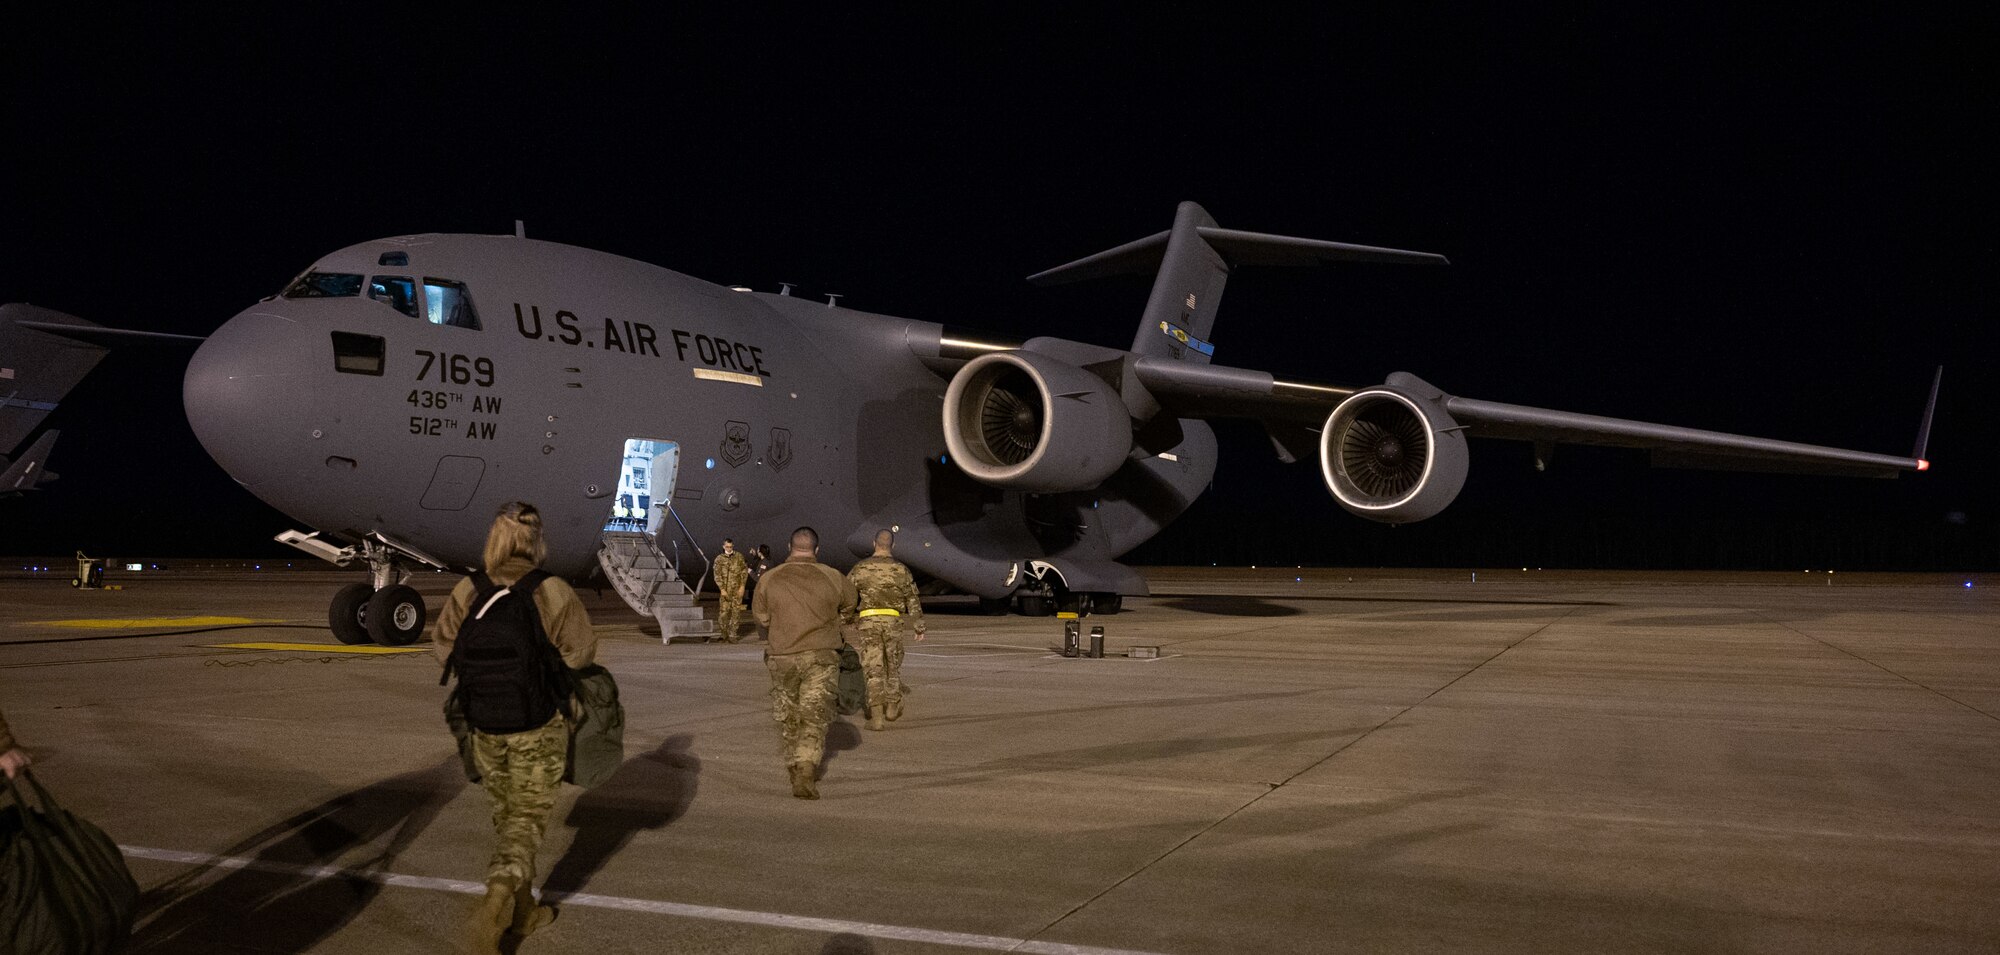 Airmen from Dover Air Force Base board a C-17 Globemaster III during a simulated deployment exercise at Dover Air Force Base, Delaware, Feb. 17, 2021. The Liberty Eagle Readiness Exercise evaluated Team Dover’s ability to rapidly deploy Airmen, Guardians and equipment with limited notice. (U.S. Air Force photo by Airman 1st Class Faith Schaefer)